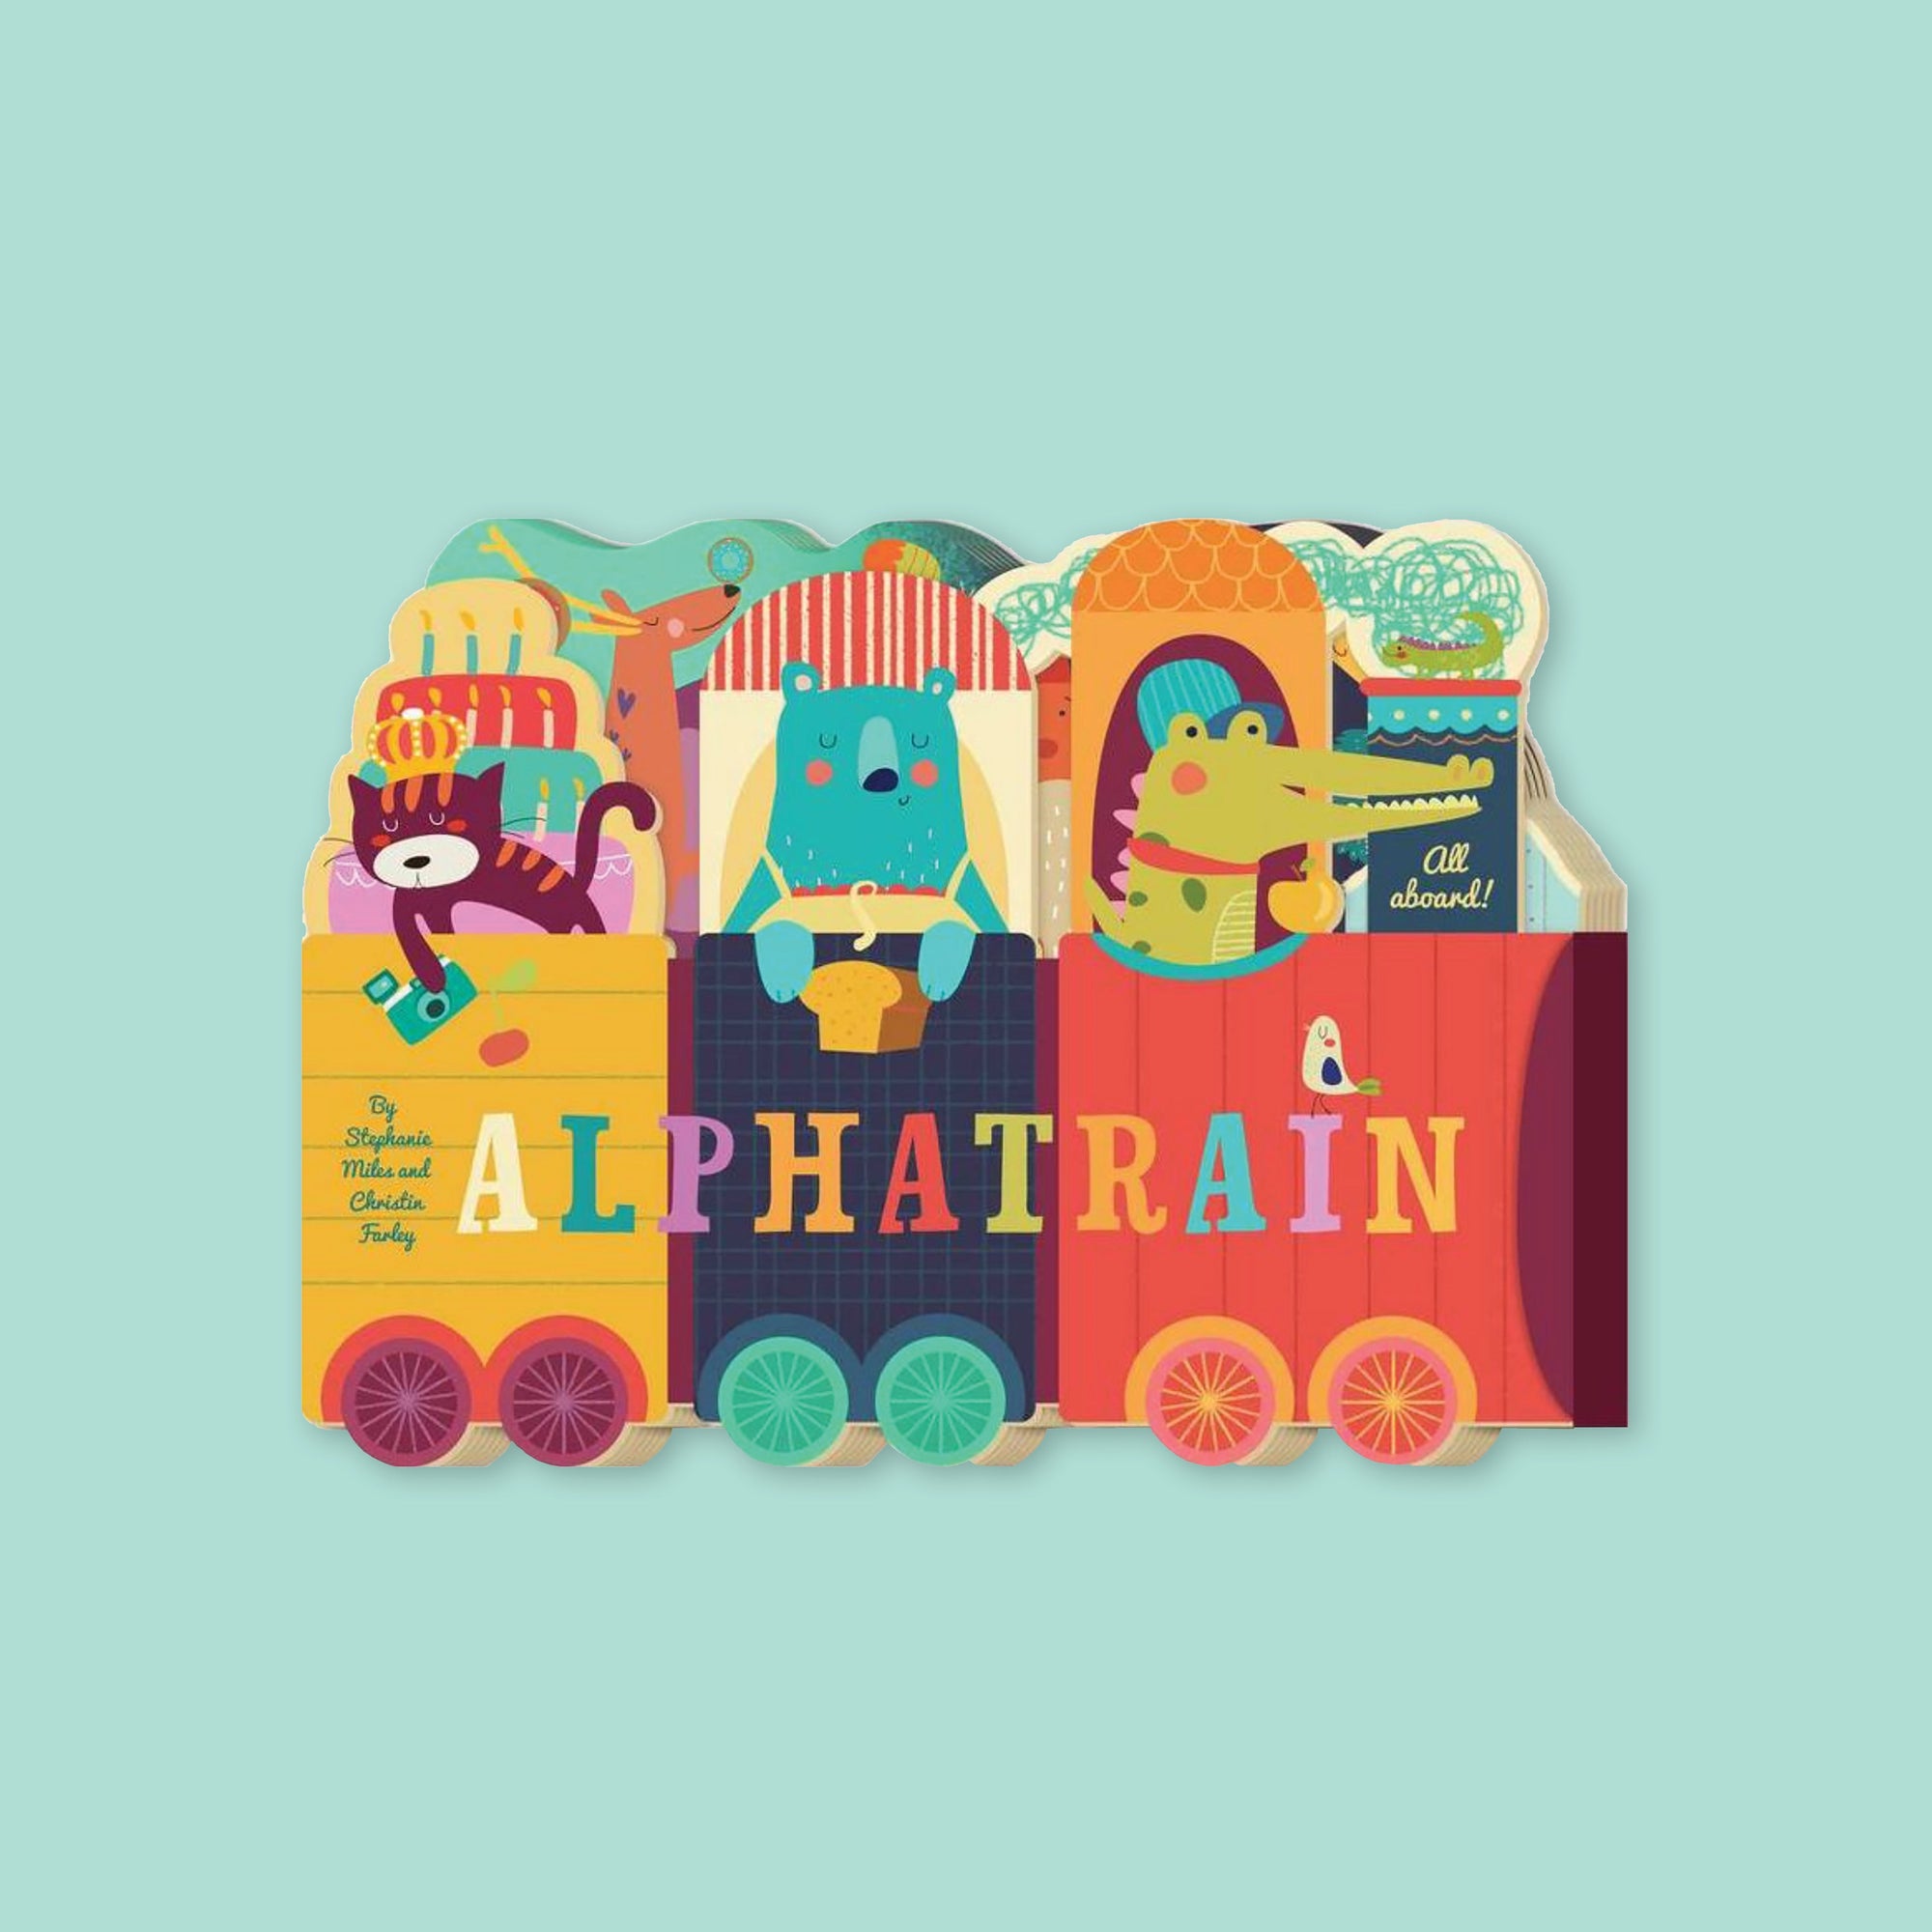 On a mint green background sits a colorful book. This 'ALPHATRAIN' book by Stephanie Miles and Christin Farley shows an illustrated cat holding a camera, a bear wearing an apron and hold a loaf of breat, an alligator wearing a red bandana, and a reindeer in the background. They are all riding on a train and it says "All aboard" in light green, handwritten script lettering.